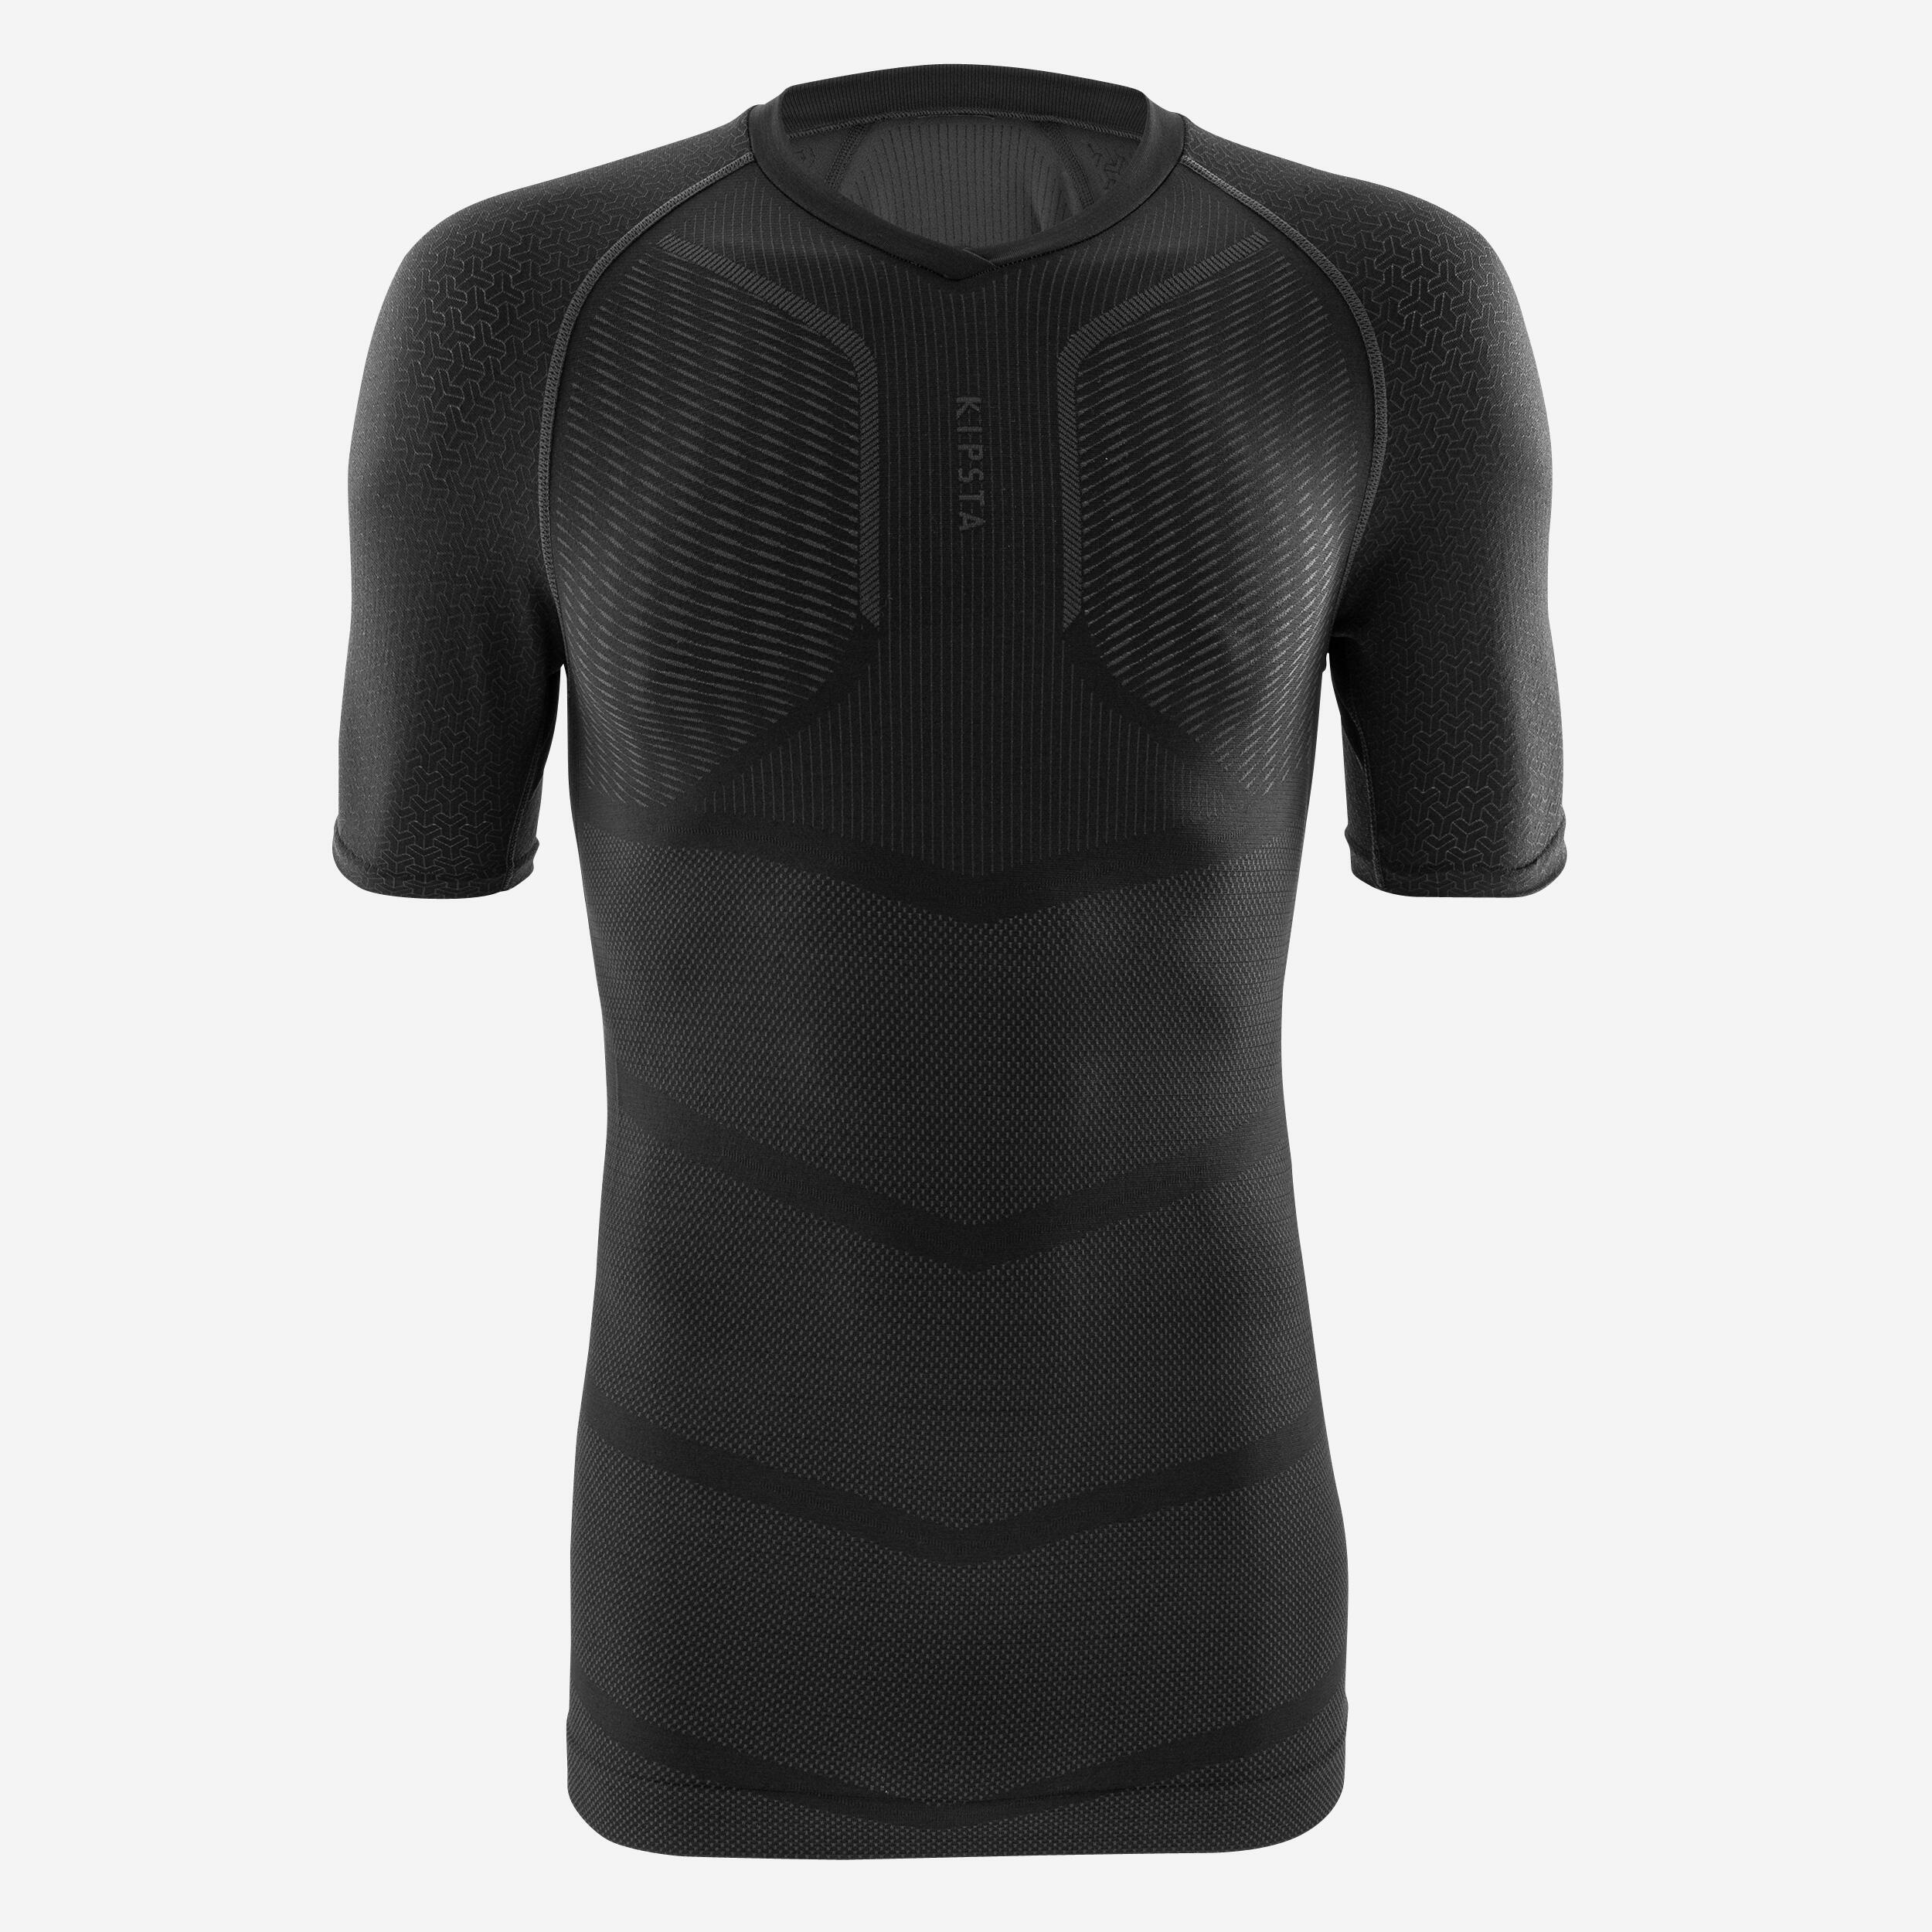 Adult Short-Sleeved Thermal Base Layer Top Keepdry 500 - Black 2/5